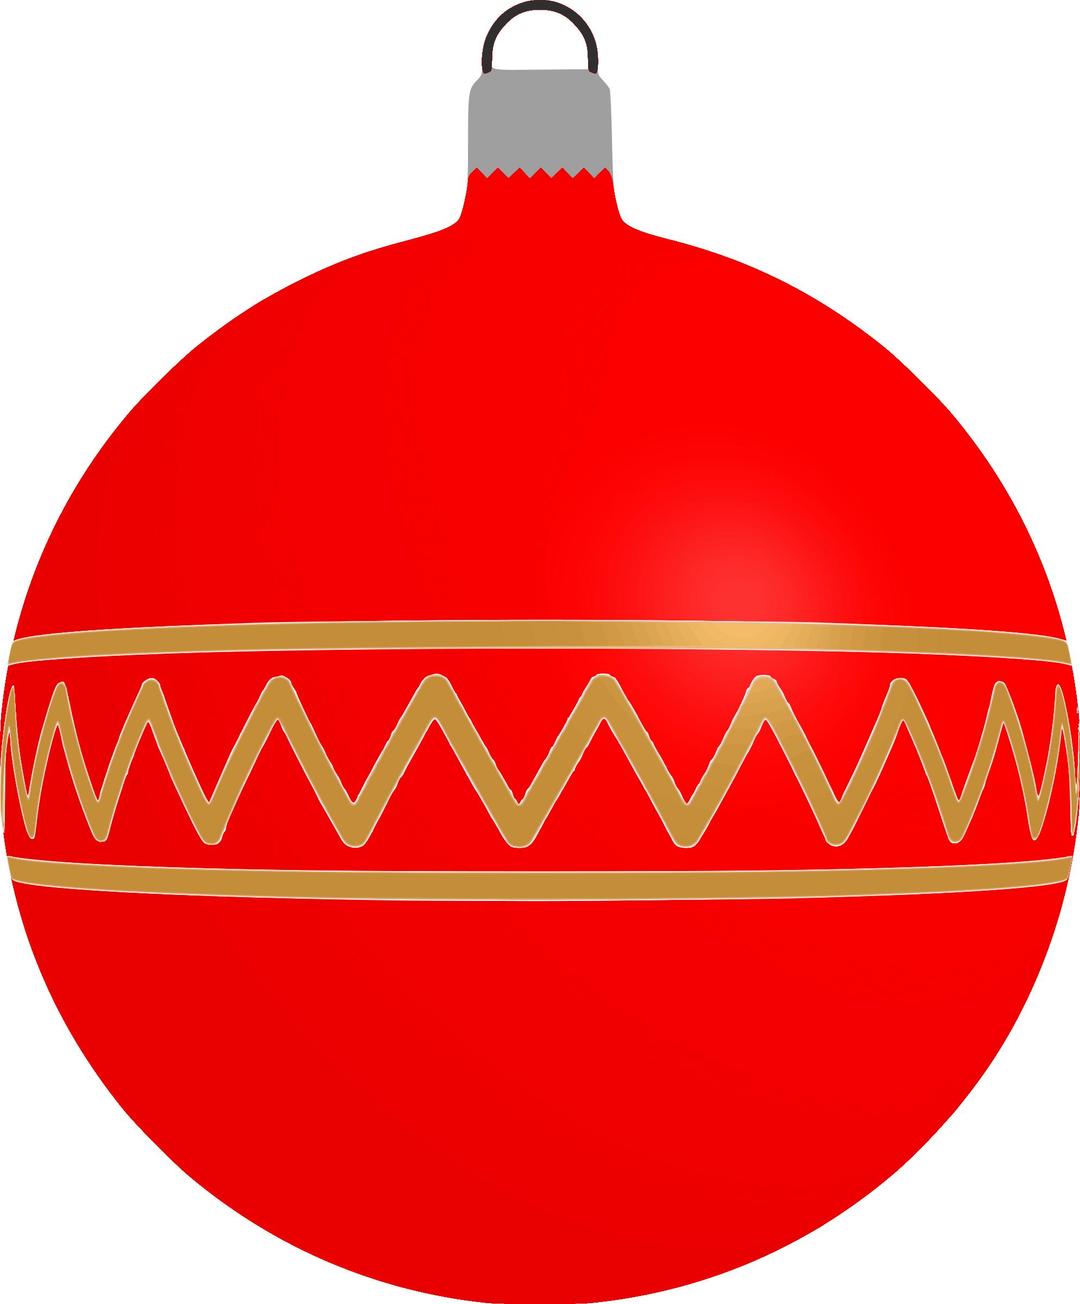 Patterned bauble 1 (red) png transparent